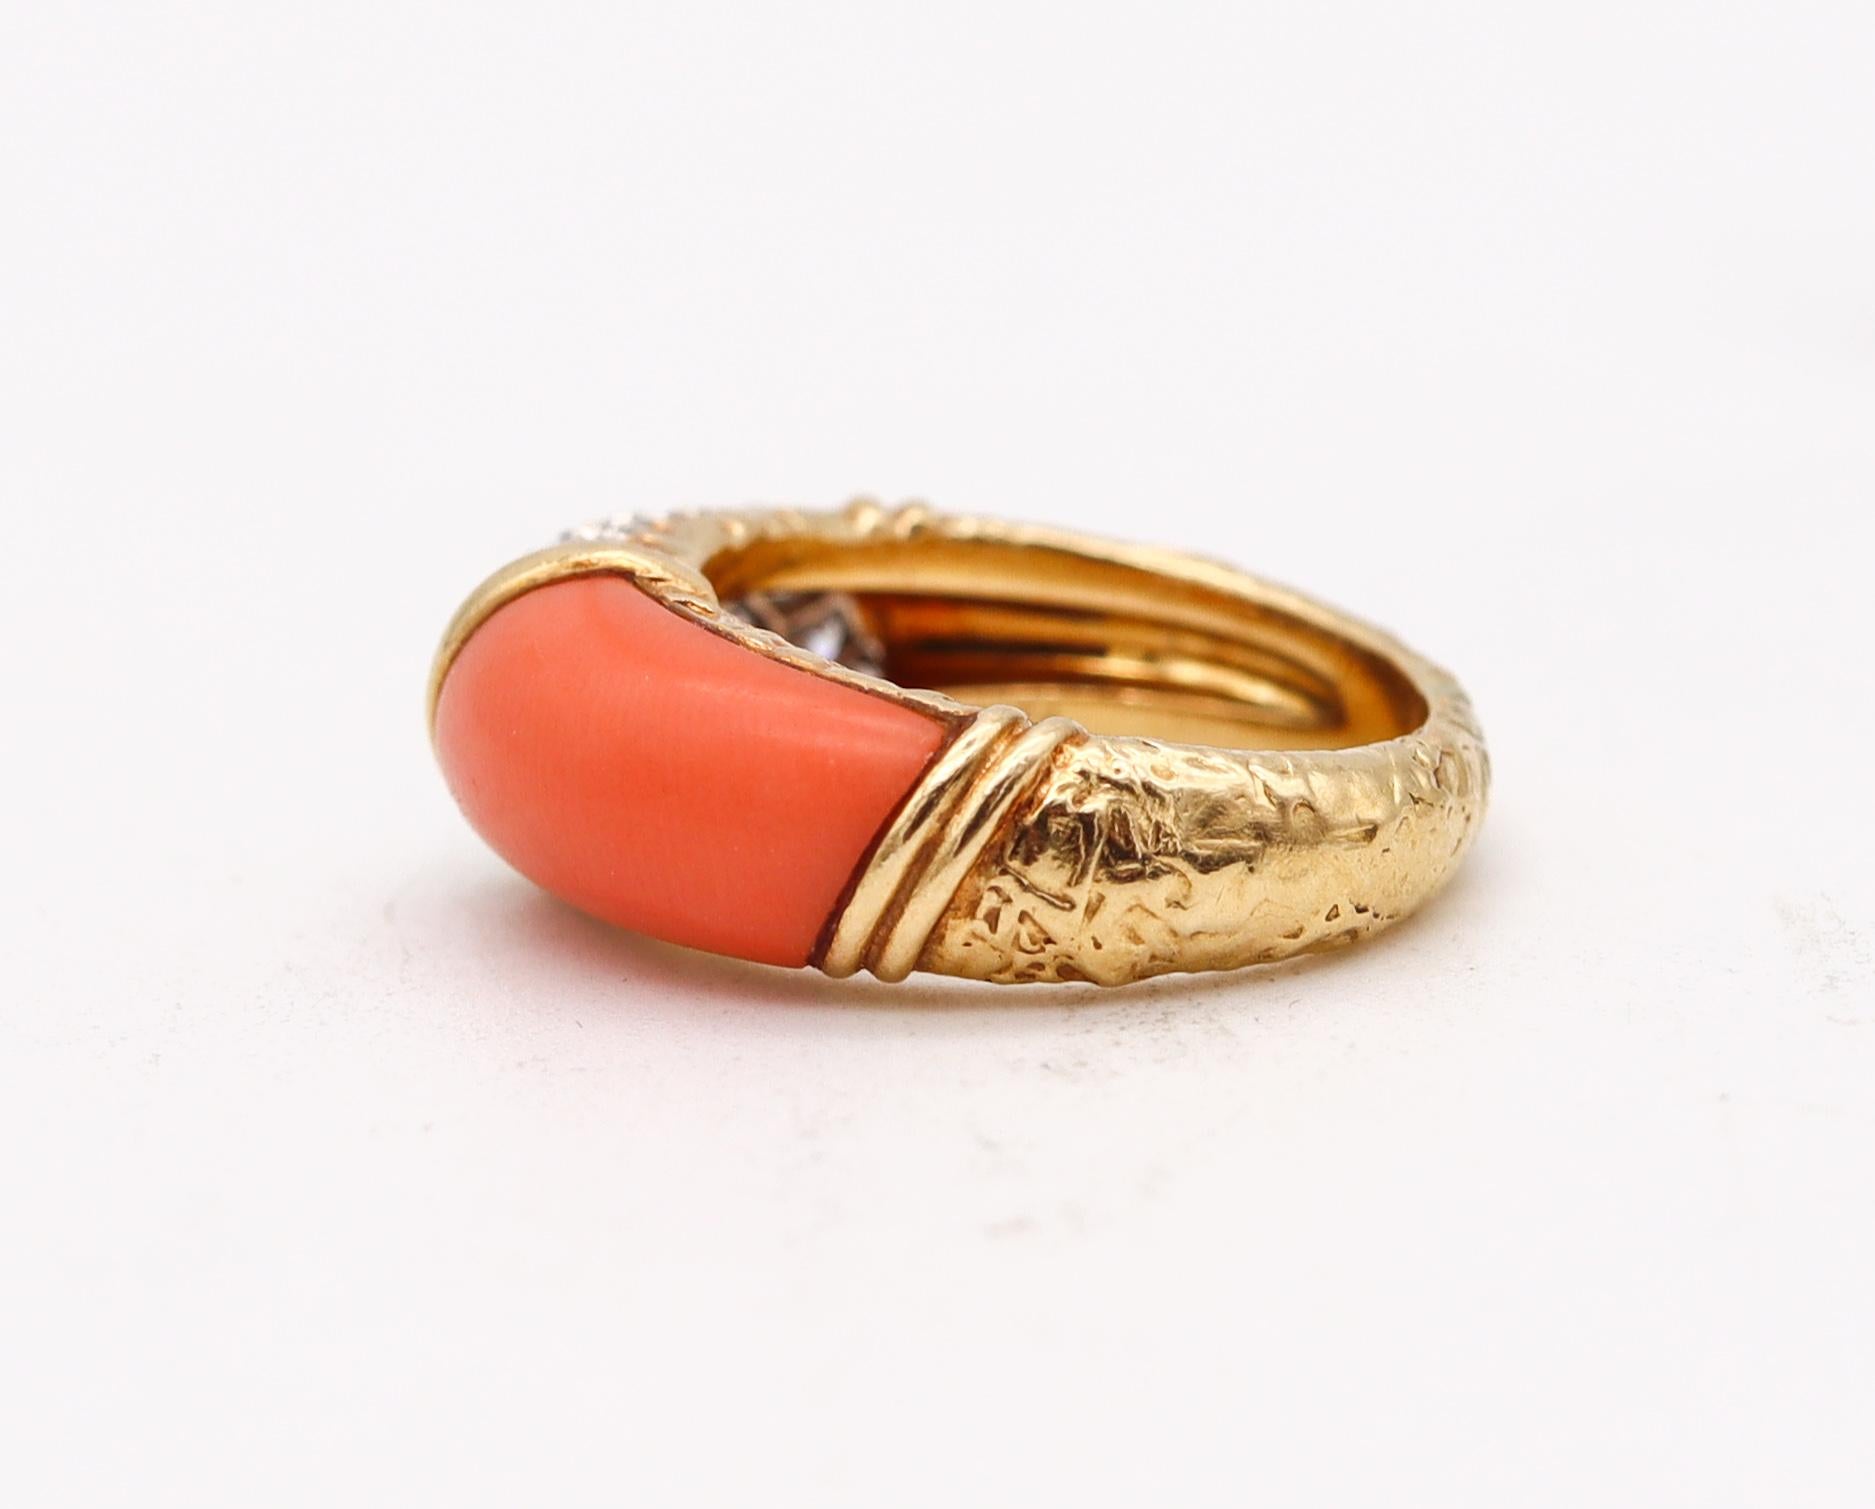 Brilliant Cut Van Cleef & Arpels 1975 Gem Set Coral Band in 18Kt Yellow Gold with VVS Diamonds For Sale